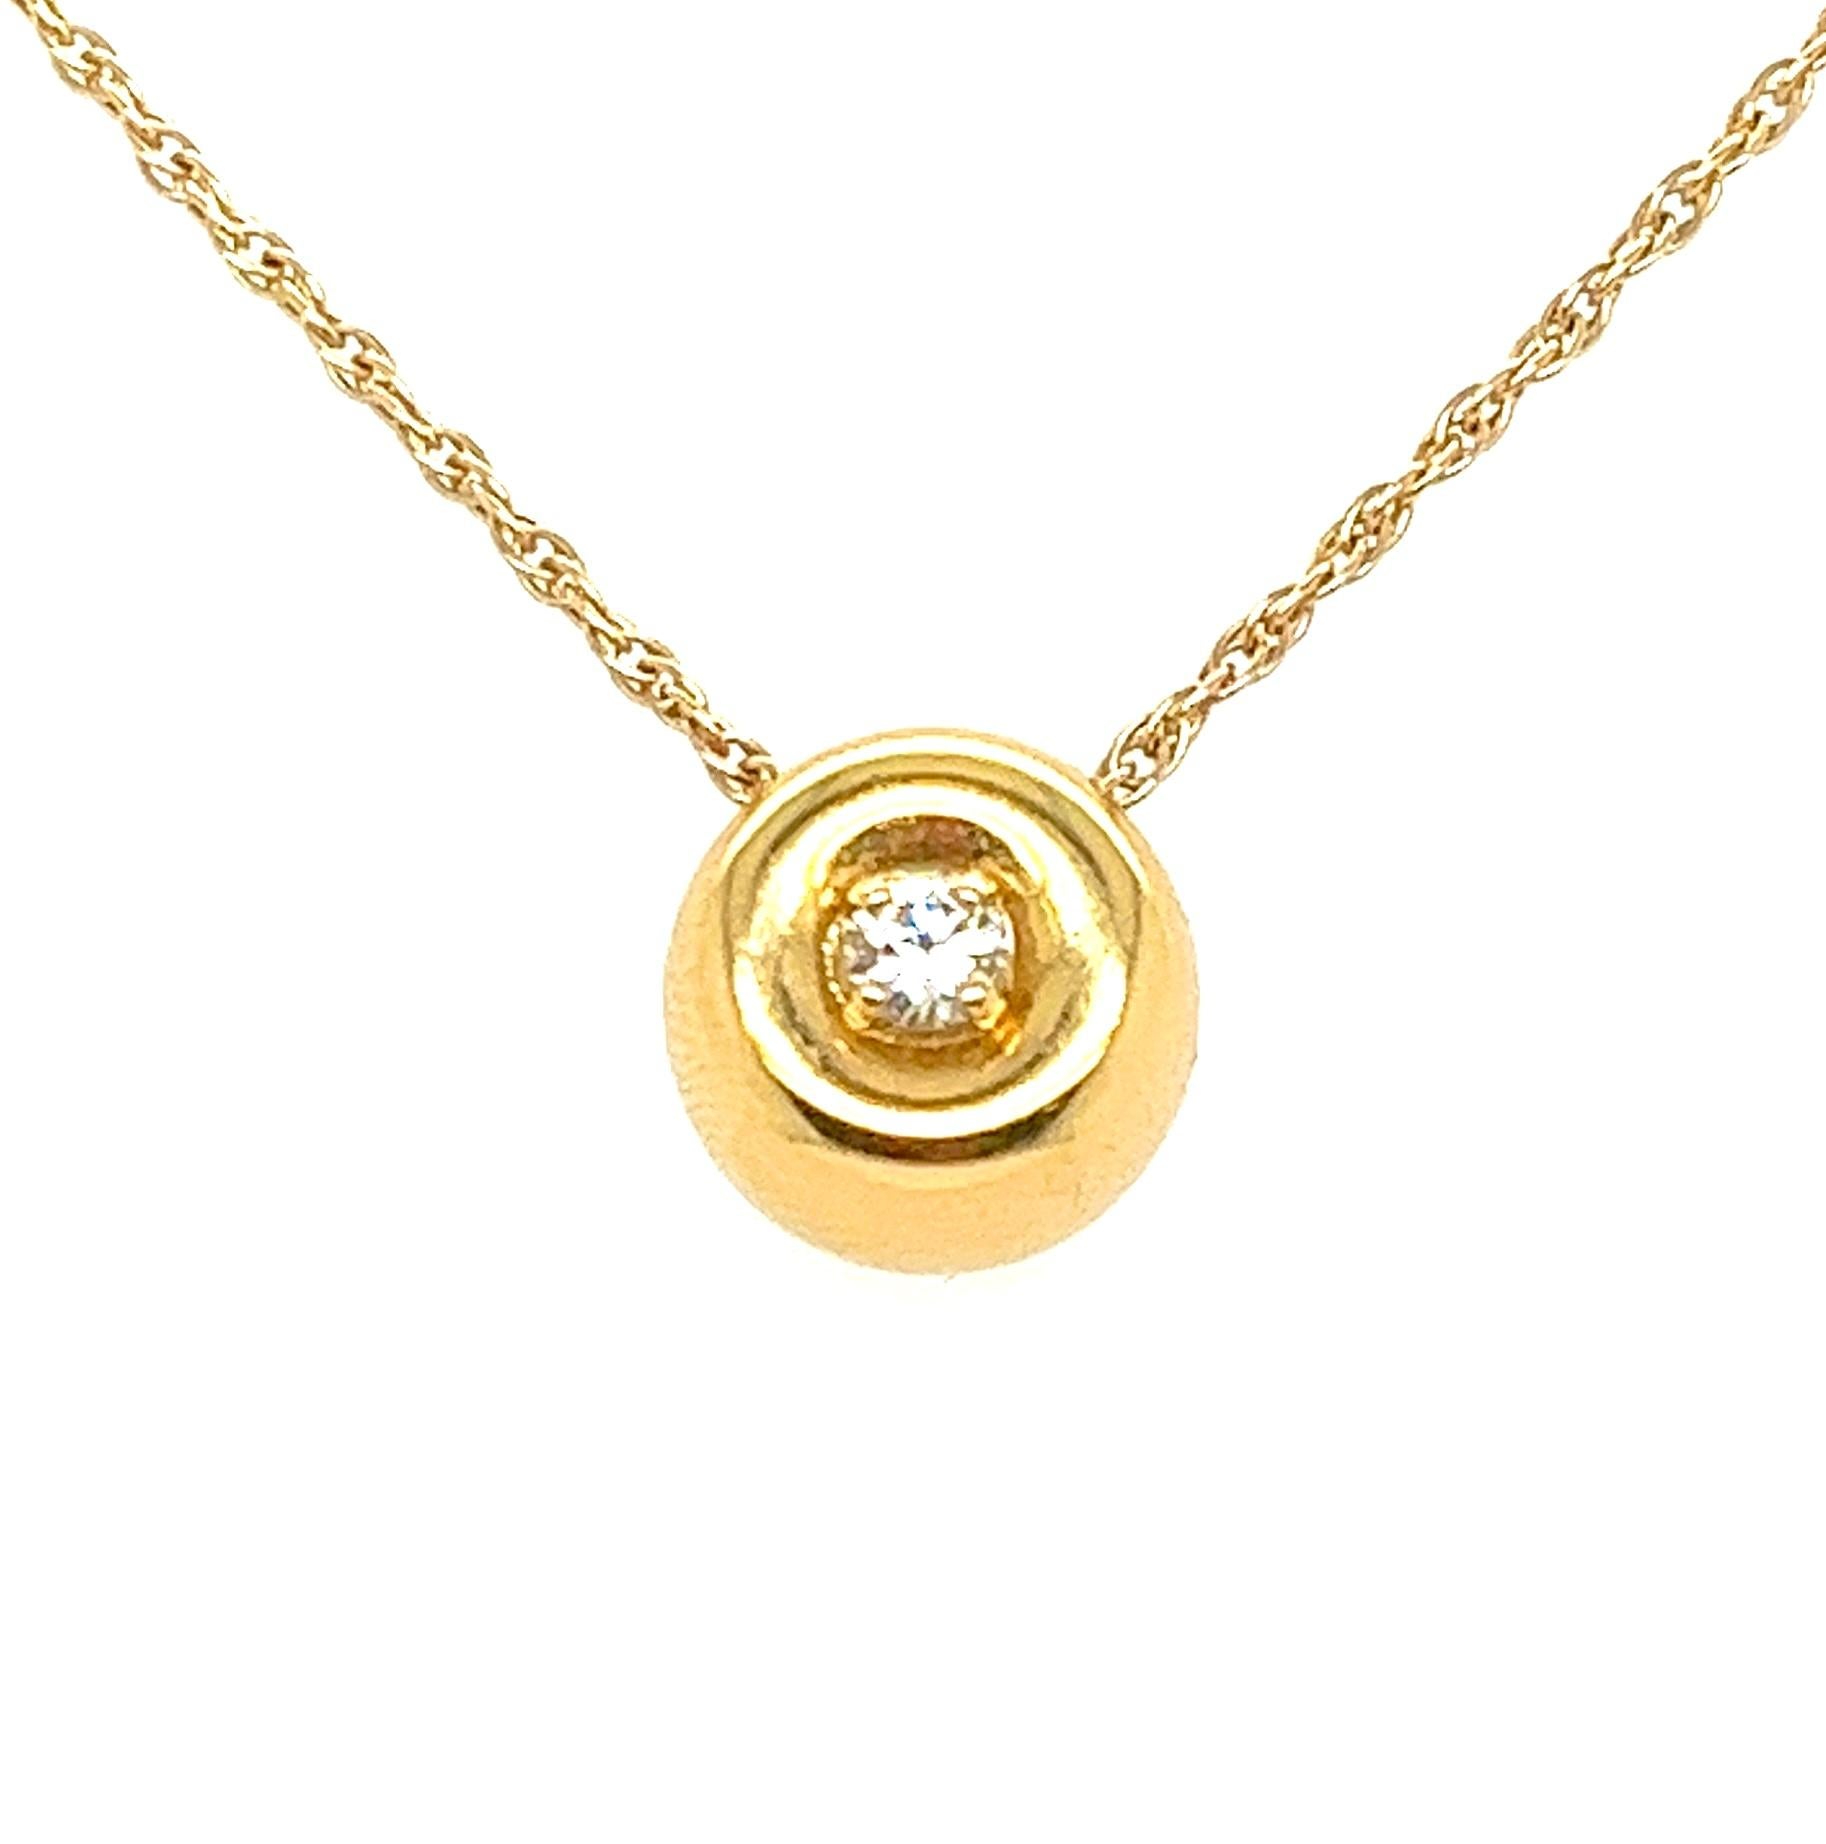 Luxurious 18kt Gold Bauble Pendant with Top-Quality Diamond

Elevate your jewelry collection with this exquisite round bauble pendant crafted in solid 18kt yellow gold. At its heart, a stunning natural earth-mined diamond, approximately 0.10ct, is